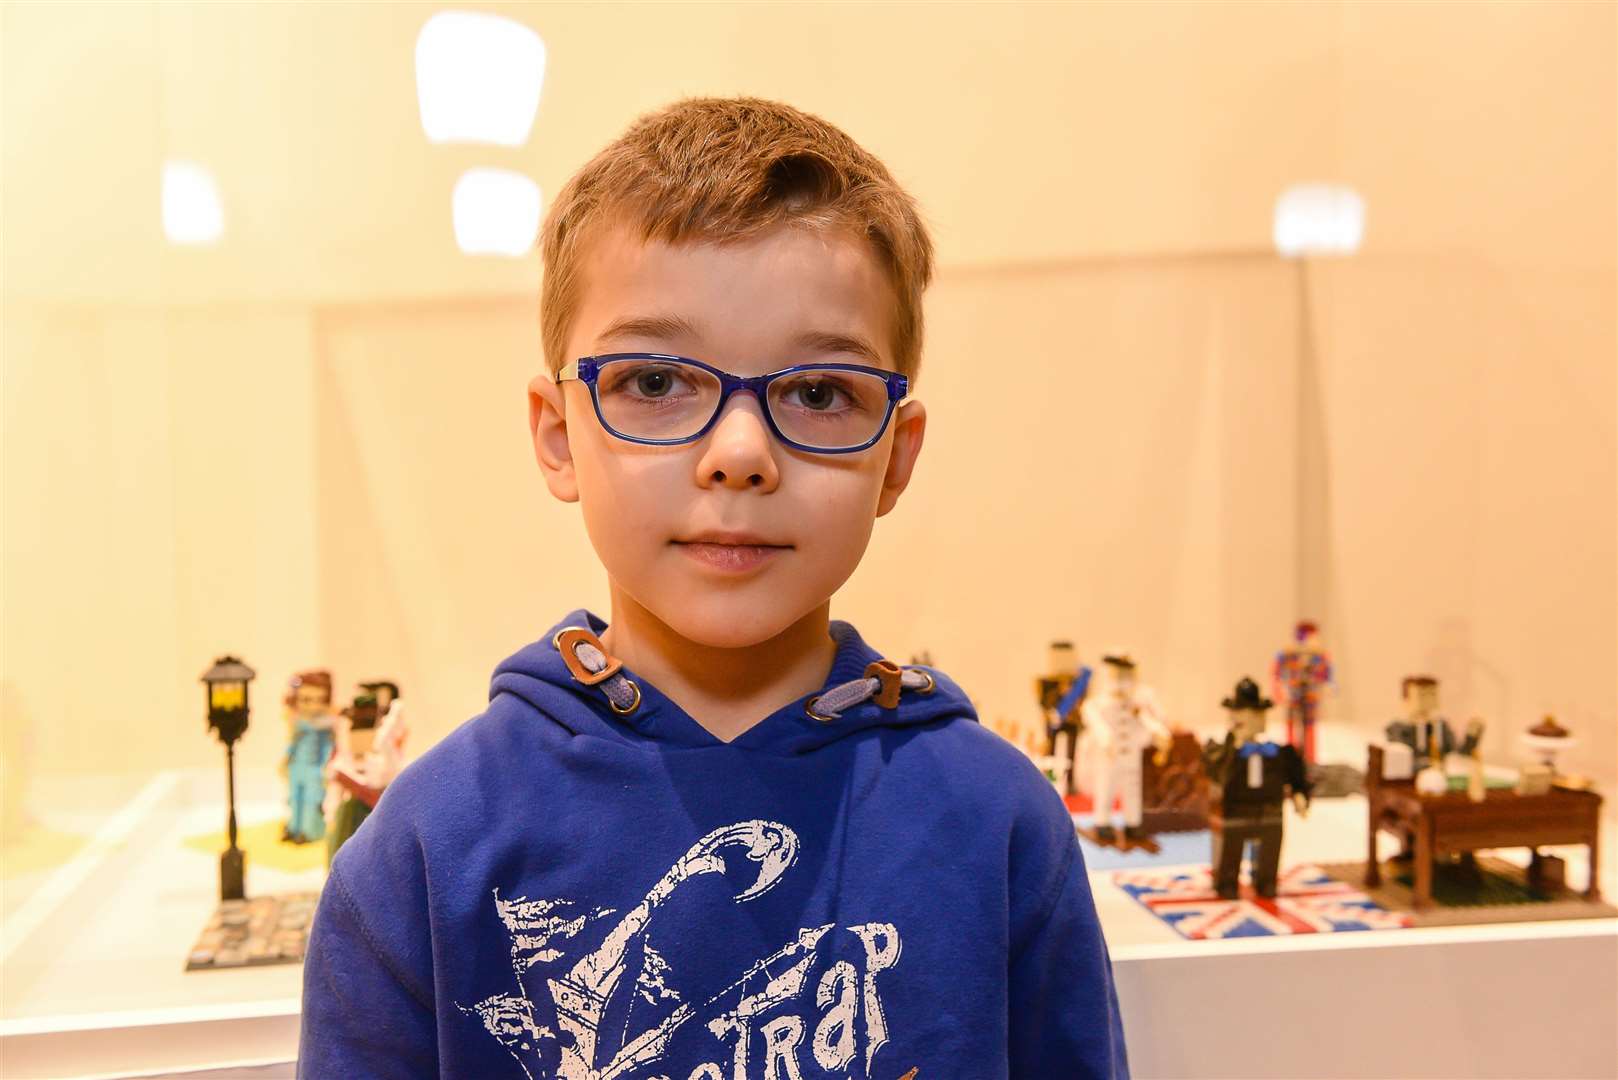 Children and their parents have been flocking to see the LEGO displays in Canterbury